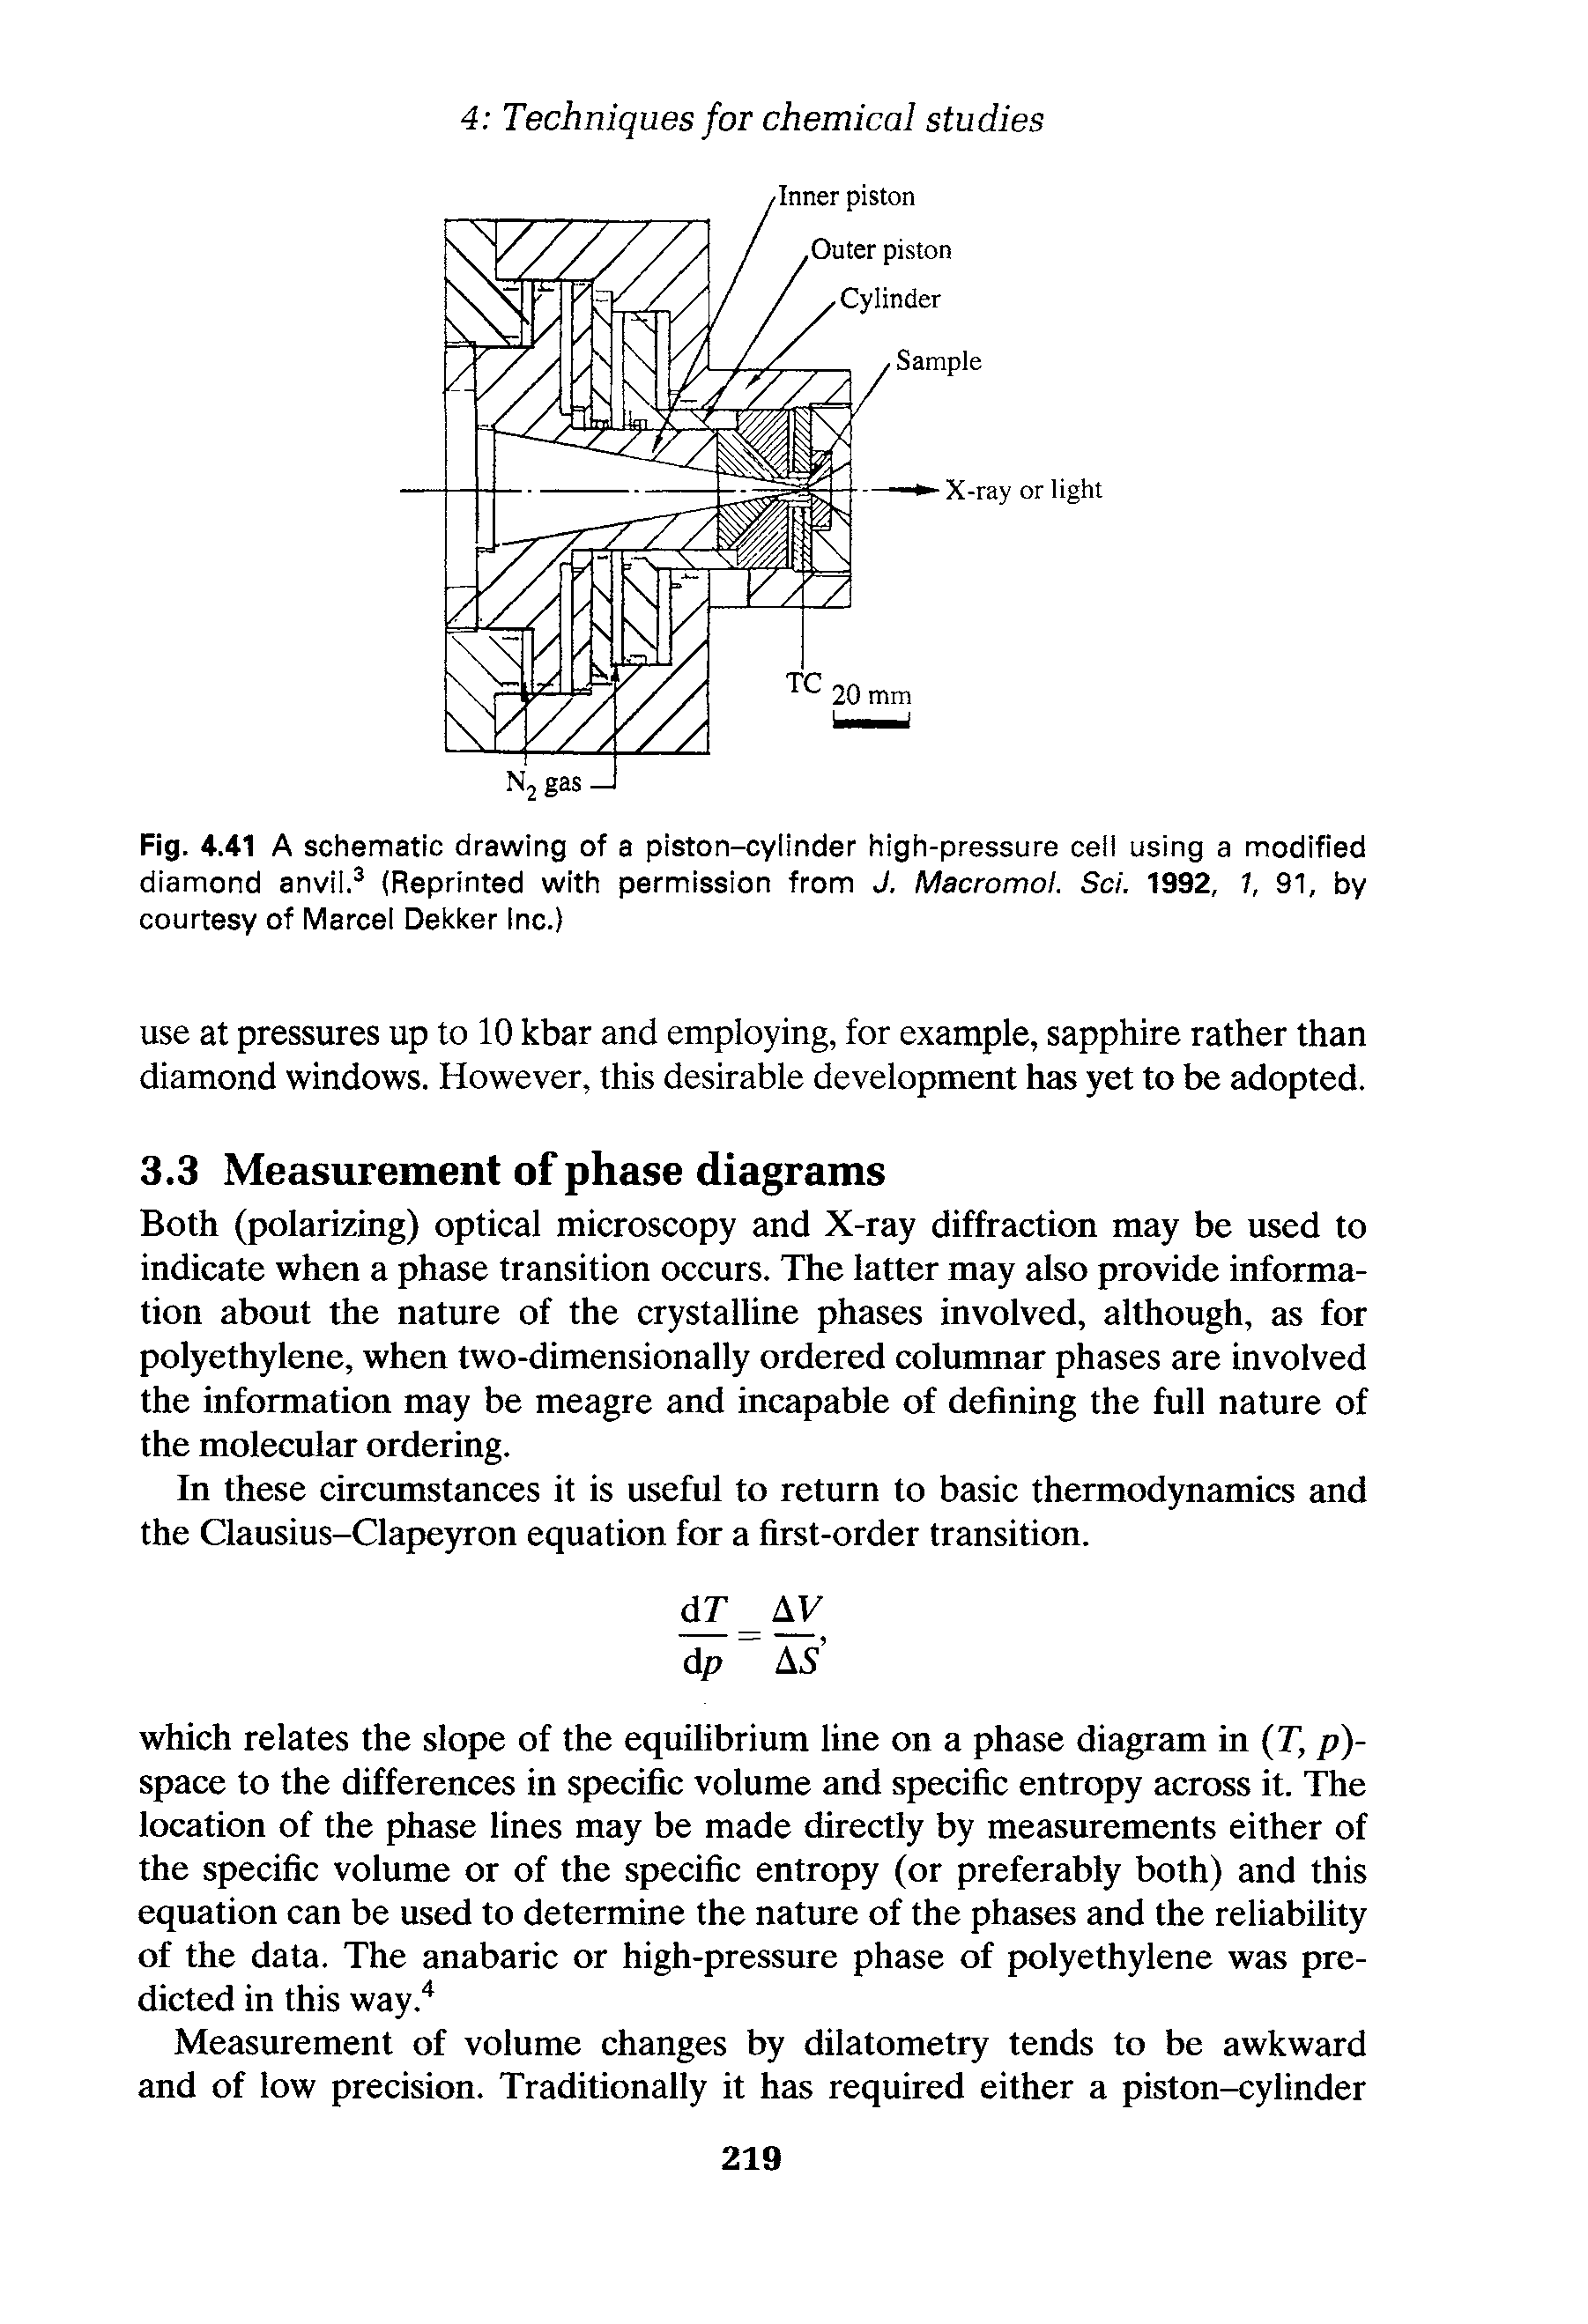 Fig. 4.41 A schematic drawing of a piston-cylinder high-pressure cell using a modified diamond anvil. (Reprinted with permission from J. Macromol. Sci. 1992, 7, 91, by courtesy of Marcel Dekker Inc.)...